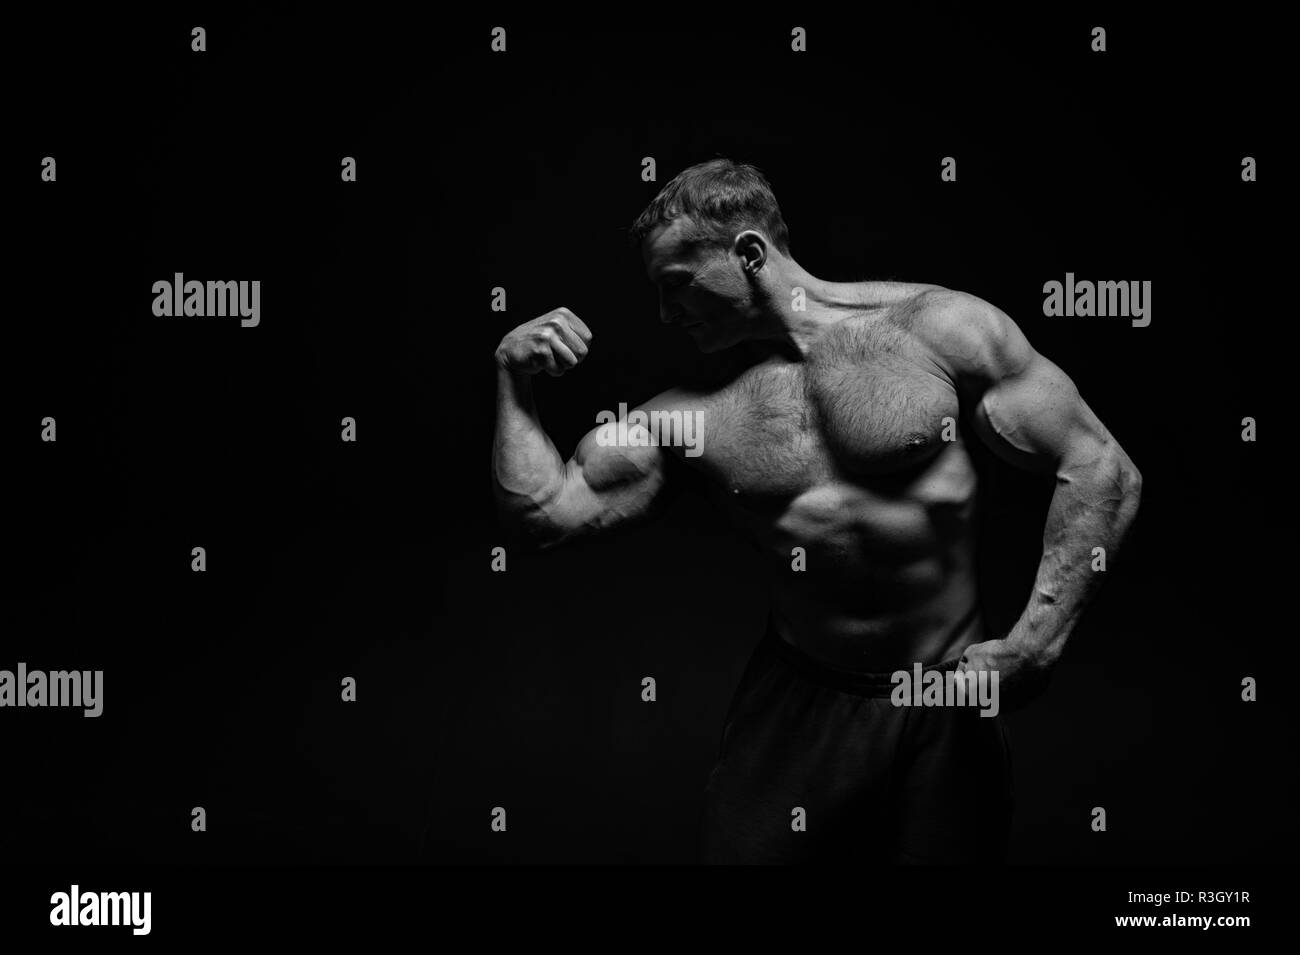 Muscle concept. Muscle man flex biceps and triceps. Bodybuilder with strong  muscle body. Muscle building exercise, black and white Stock Photo - Alamy